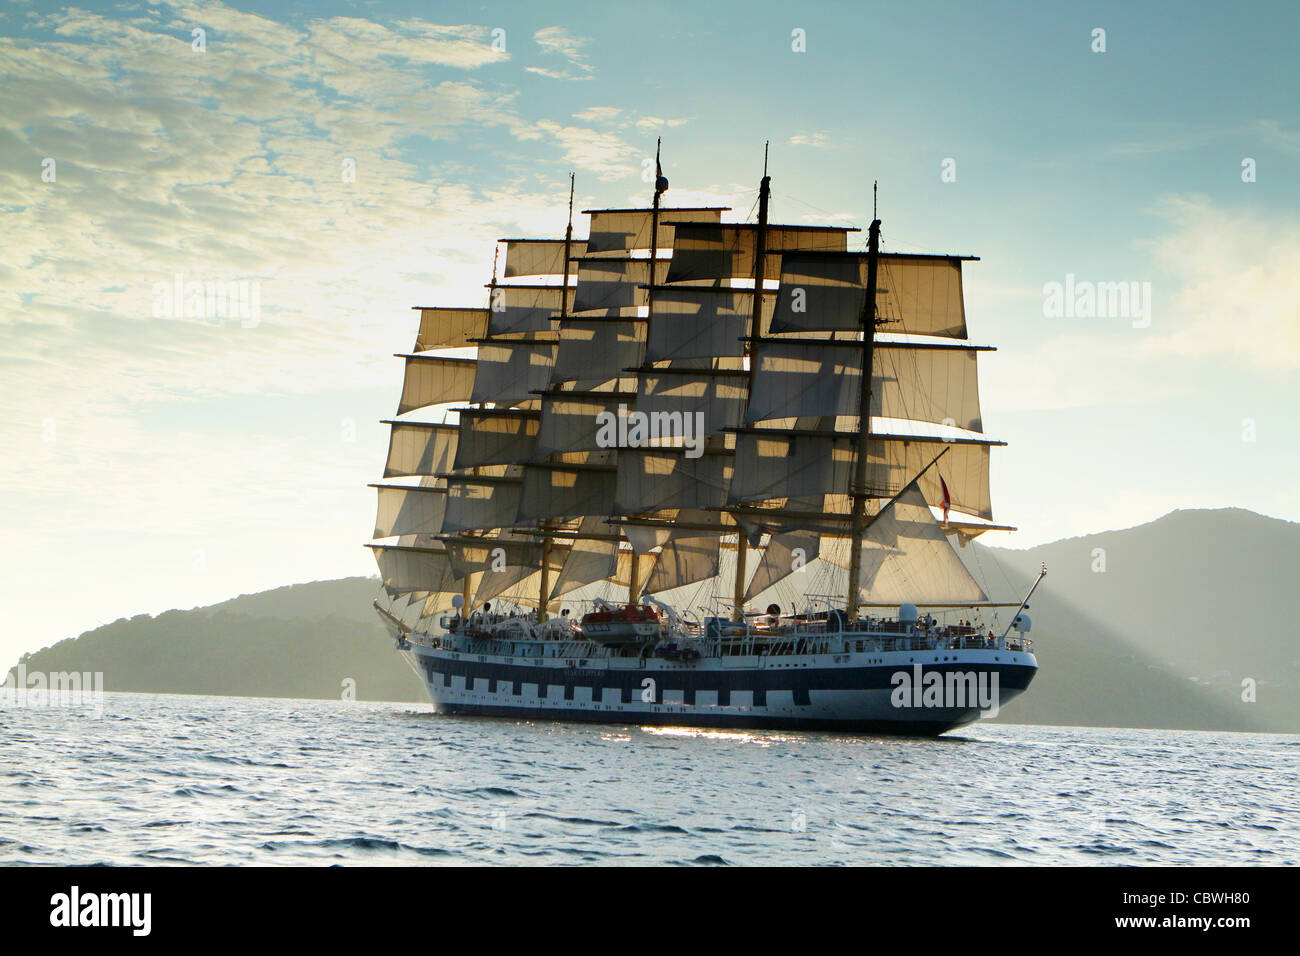 Star Clipper's Square Rigged ship 'Royal Clipper' under full sail off The Saintes in the West Indies Stock Photo